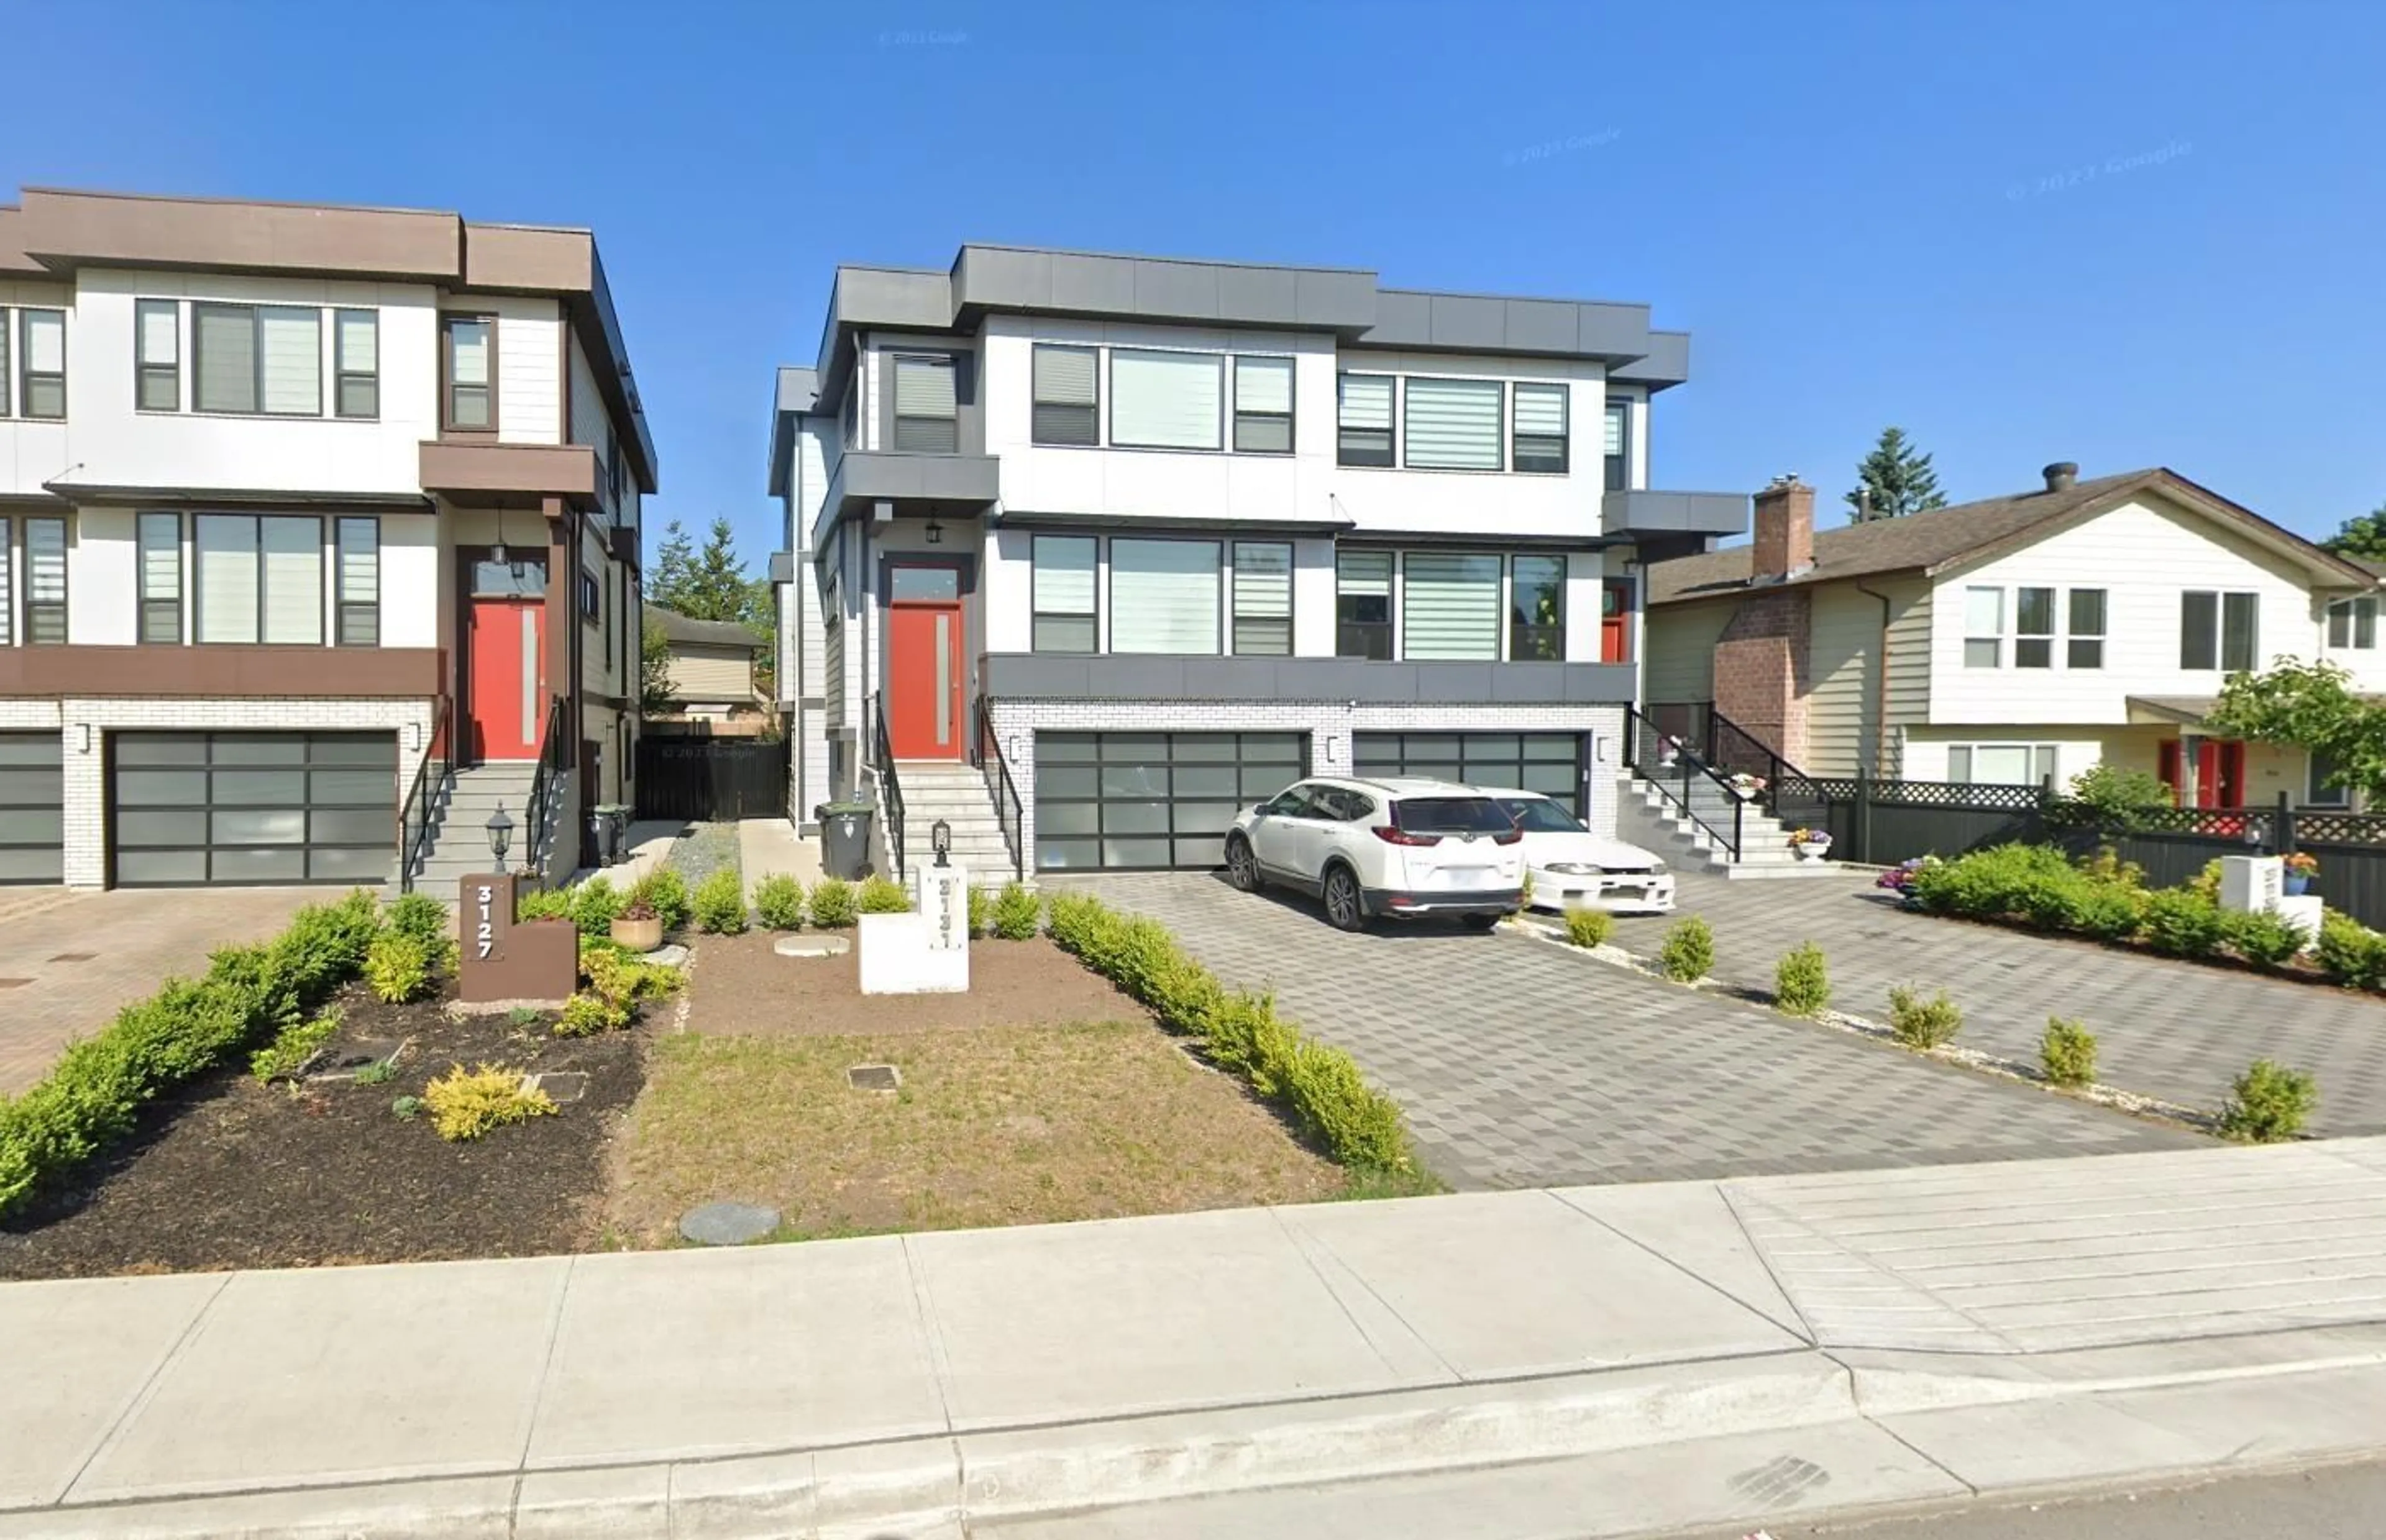 A pic from exterior of the house or condo for 3131 268 STREET, Langley British Columbia V4W3E4